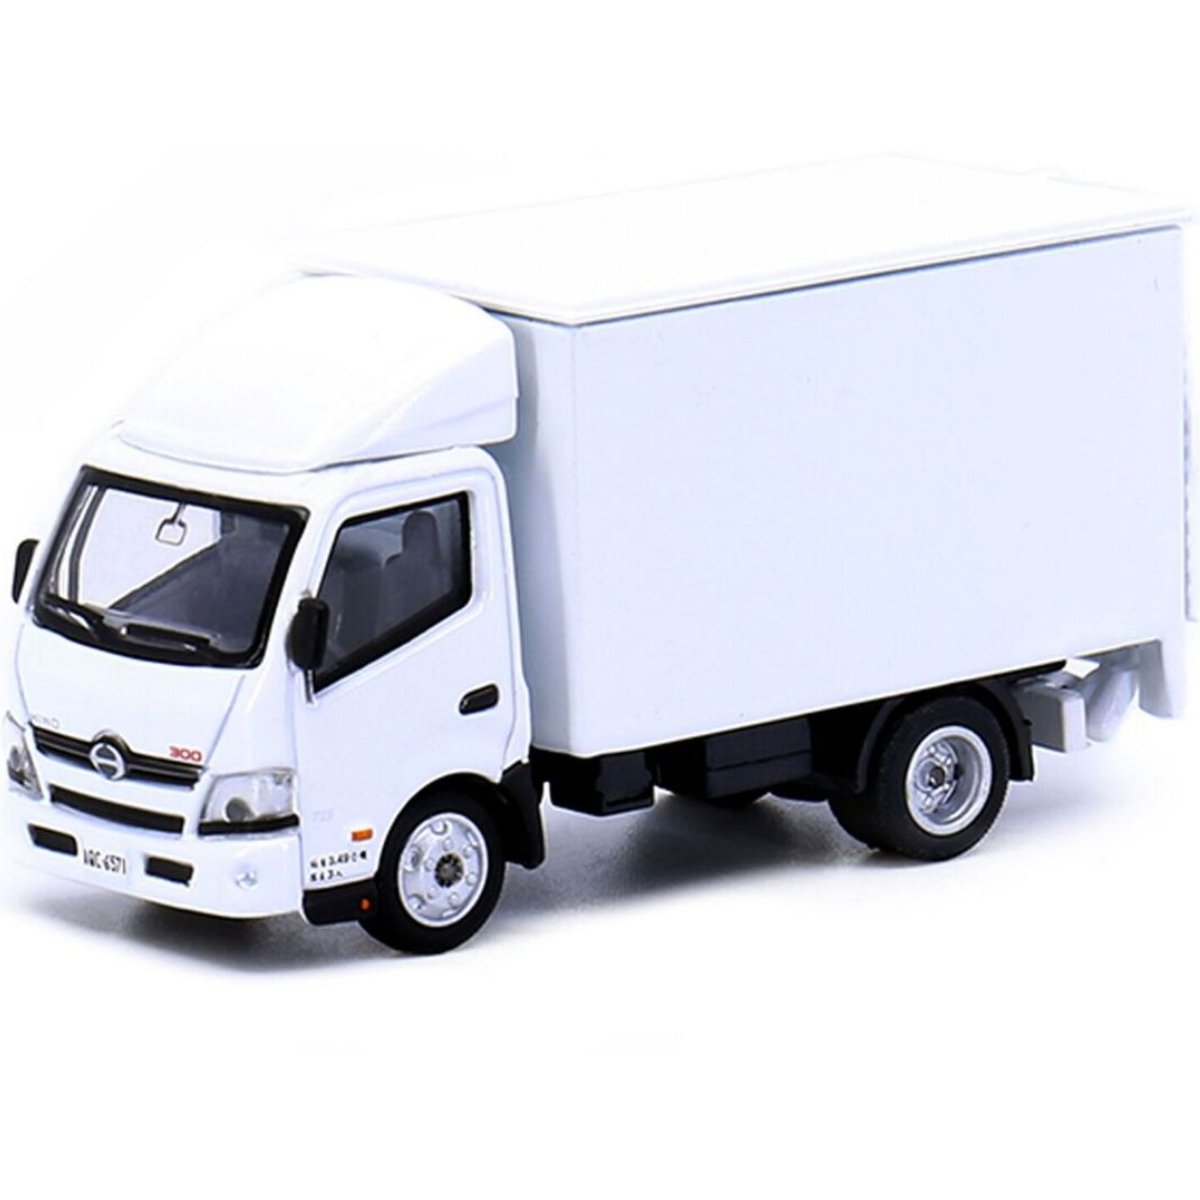 Tiny Models Hino 300 Box Lorry (1:64 Scale) - Phillips Hobbies